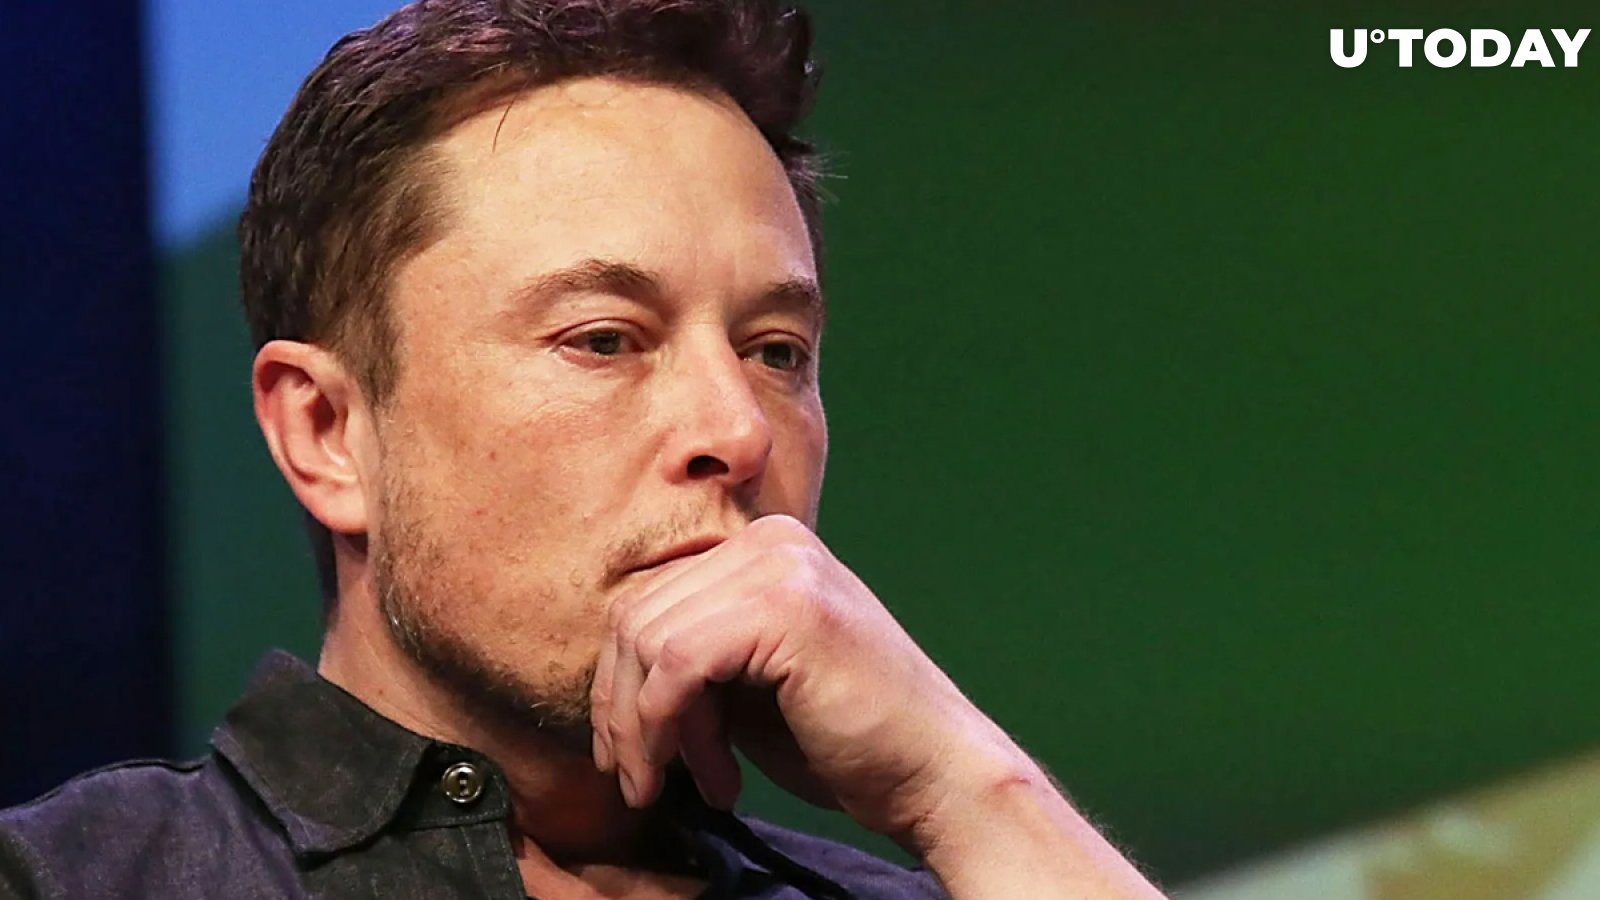 Dogecoin Fan Elon Musk Urges Followers to Invest in Crypto with Caution